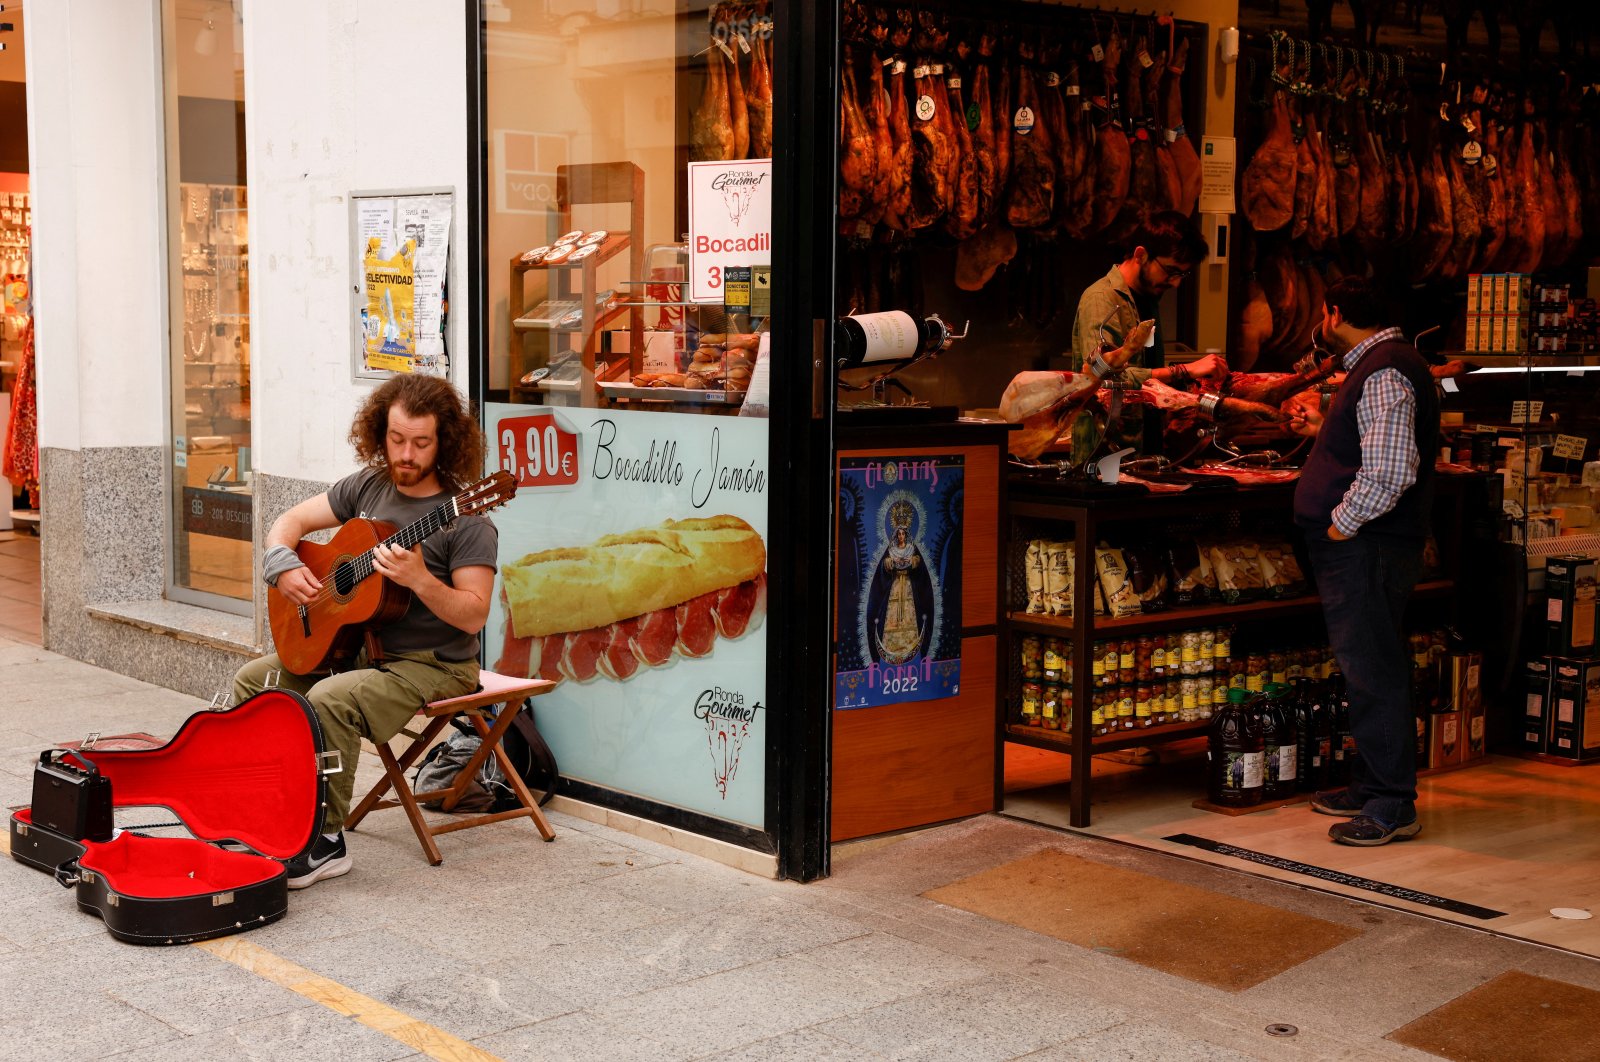 A street musician plays a guitar as a worker cuts ham in a shop in Ronda, southern Spain, April 27, 2022. (Reuters Photo)